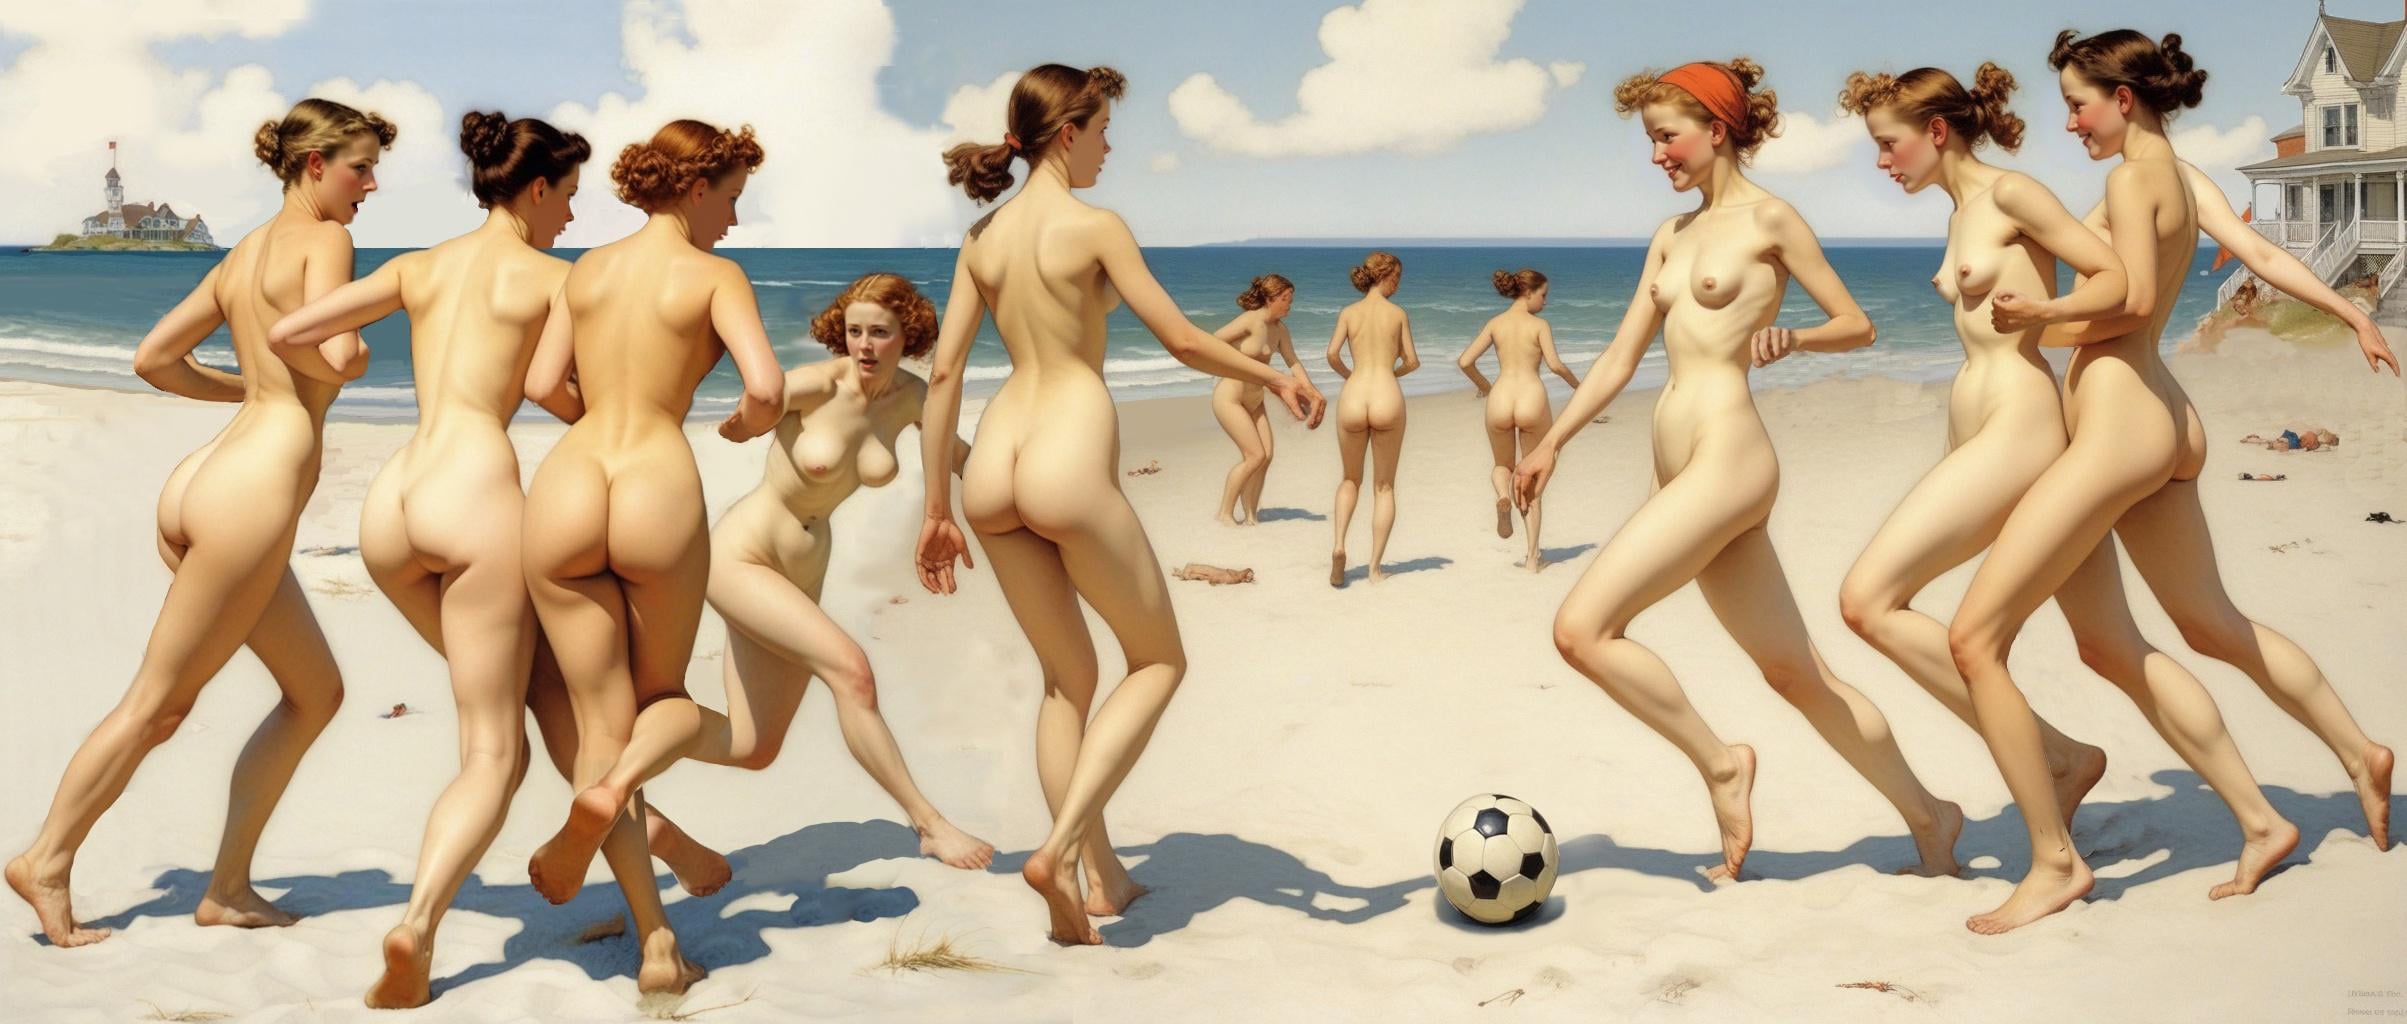 A vintage illustration: playing football on the beach